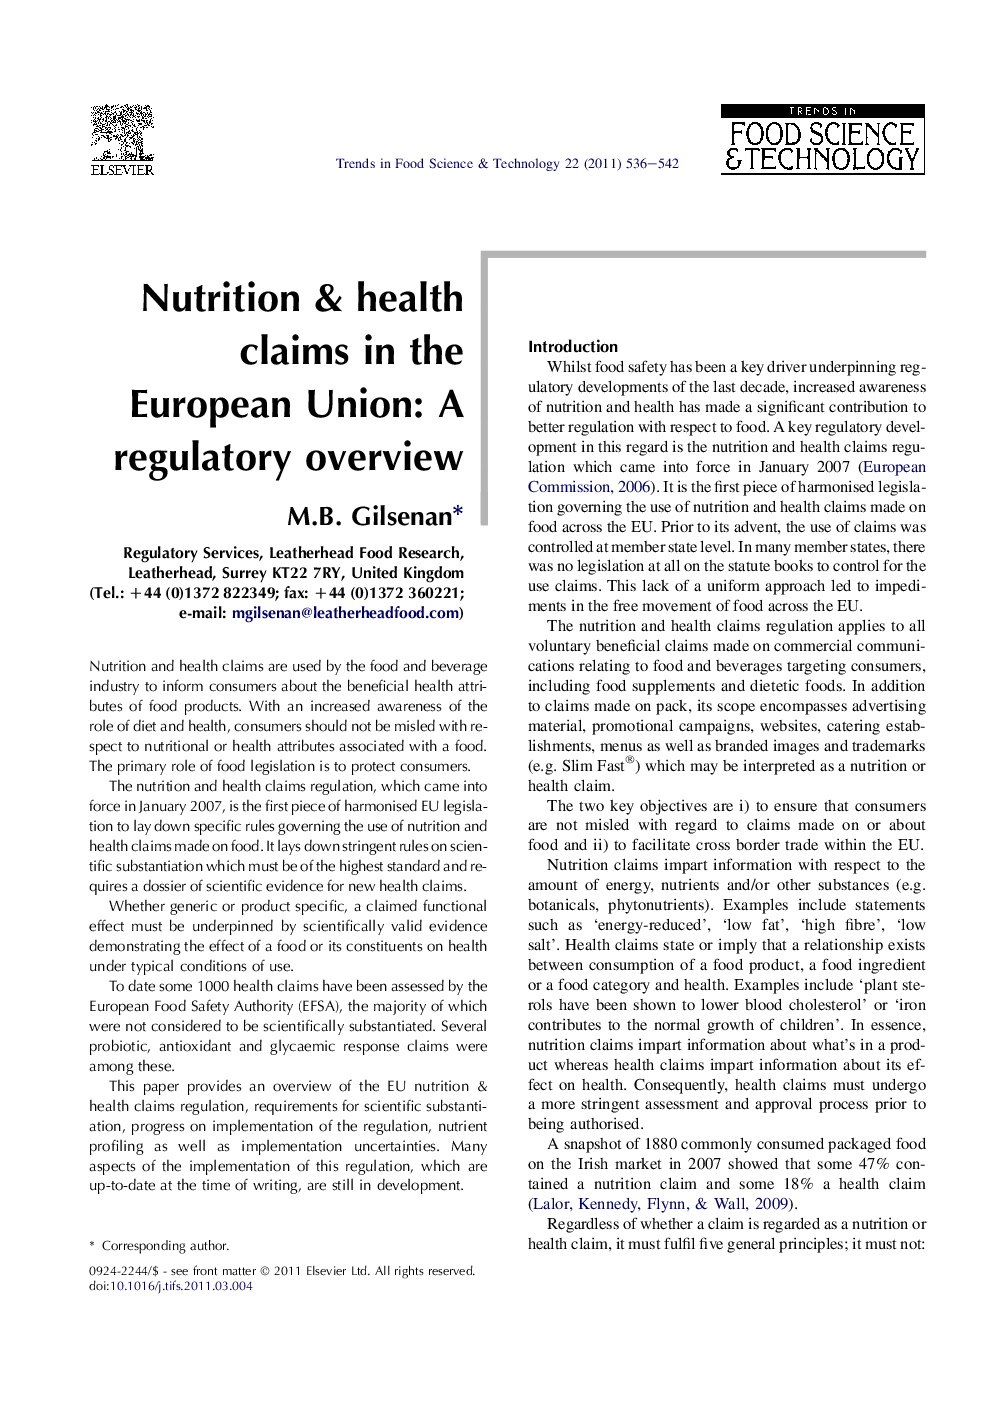 Nutrition & health claims in the European Union: A regulatory overview